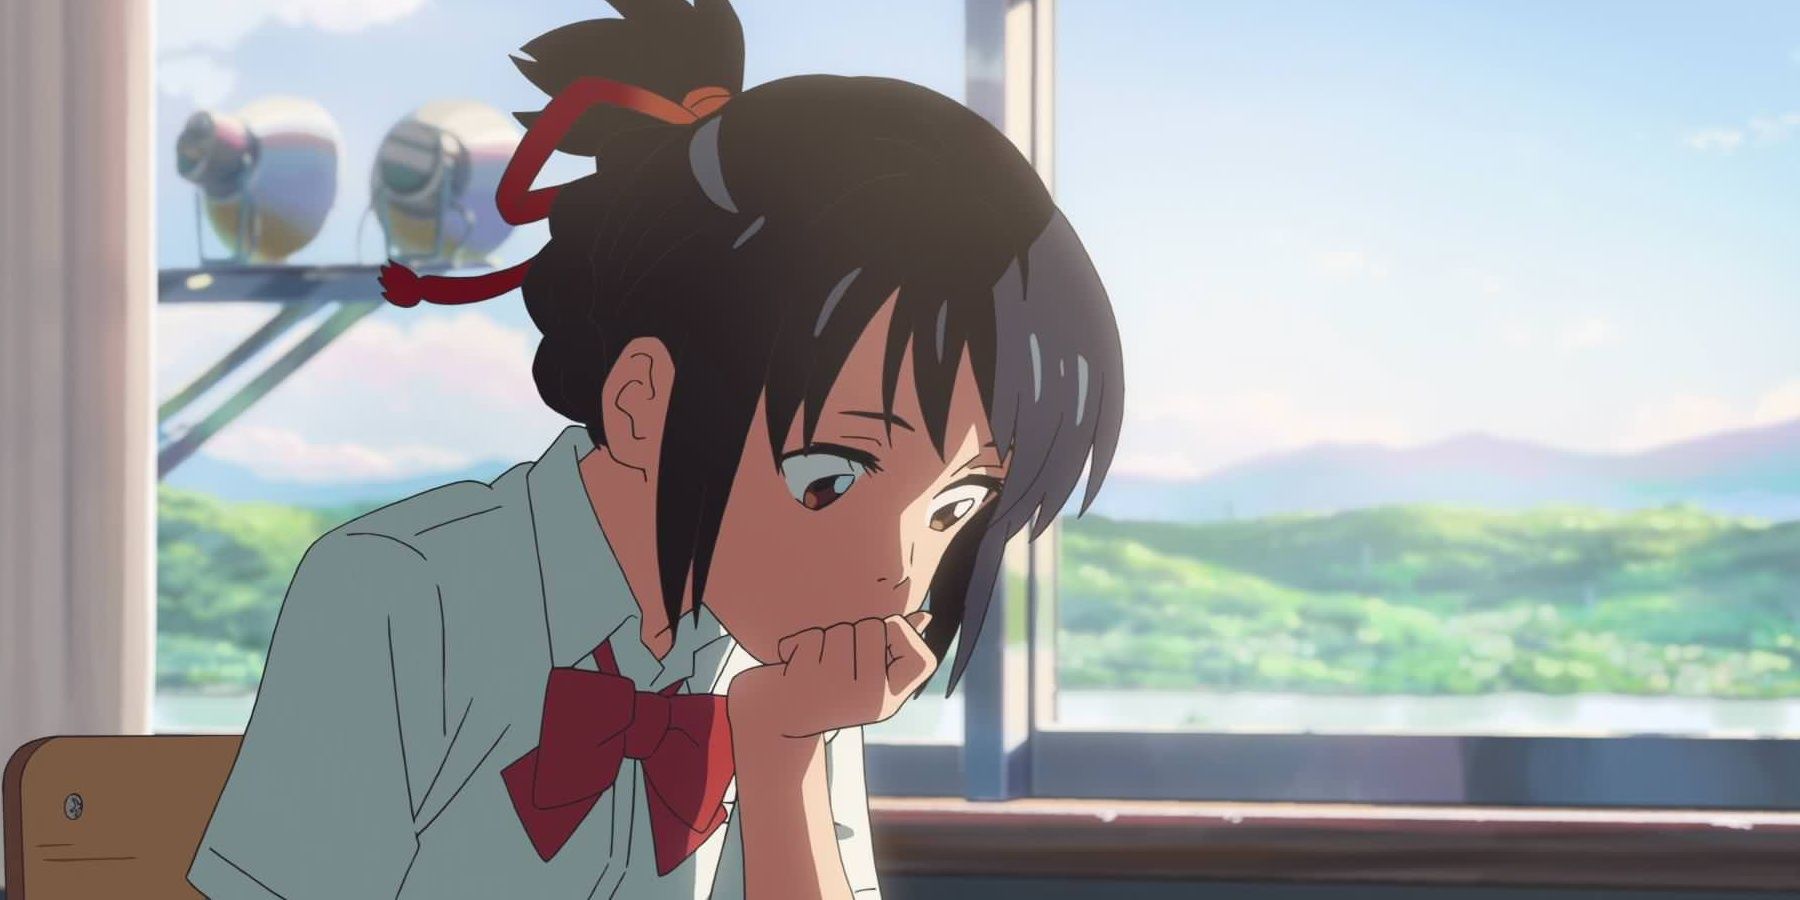 Mitsuha From Your Name In School